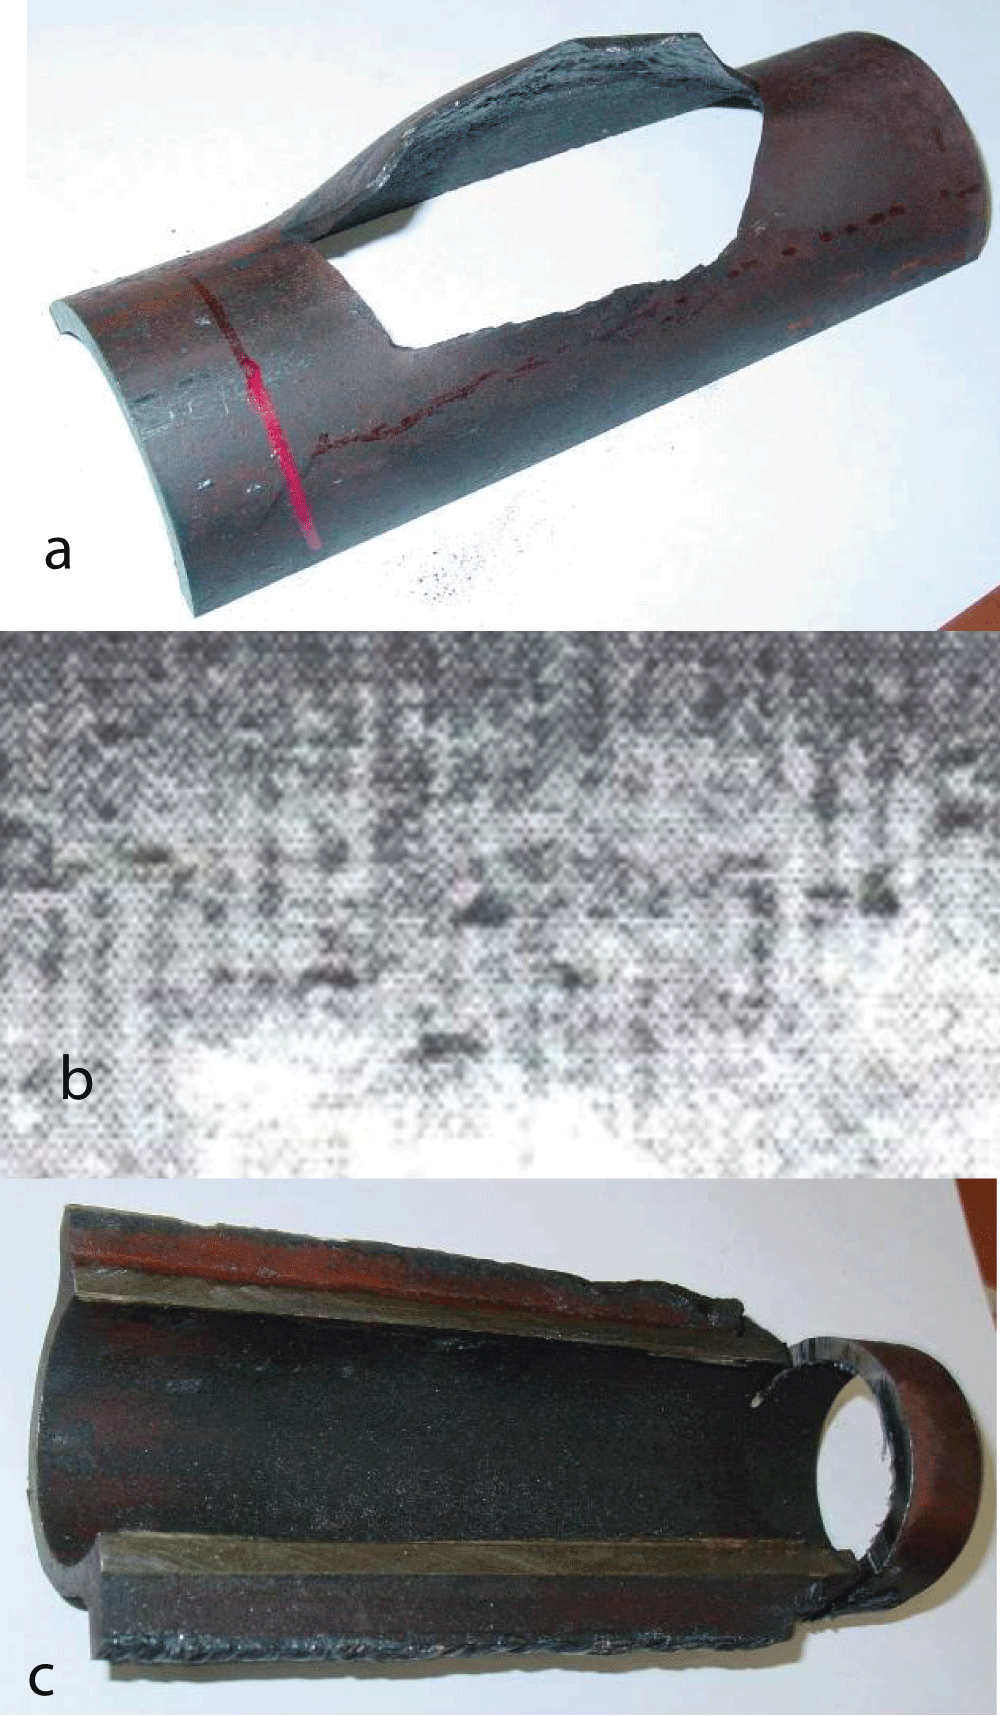 Photograph of a damaged tube. Here, a) Fire half of the tube; b) Internal surface of the fire half of the tube; c) Internal surface of the back half of the tube.